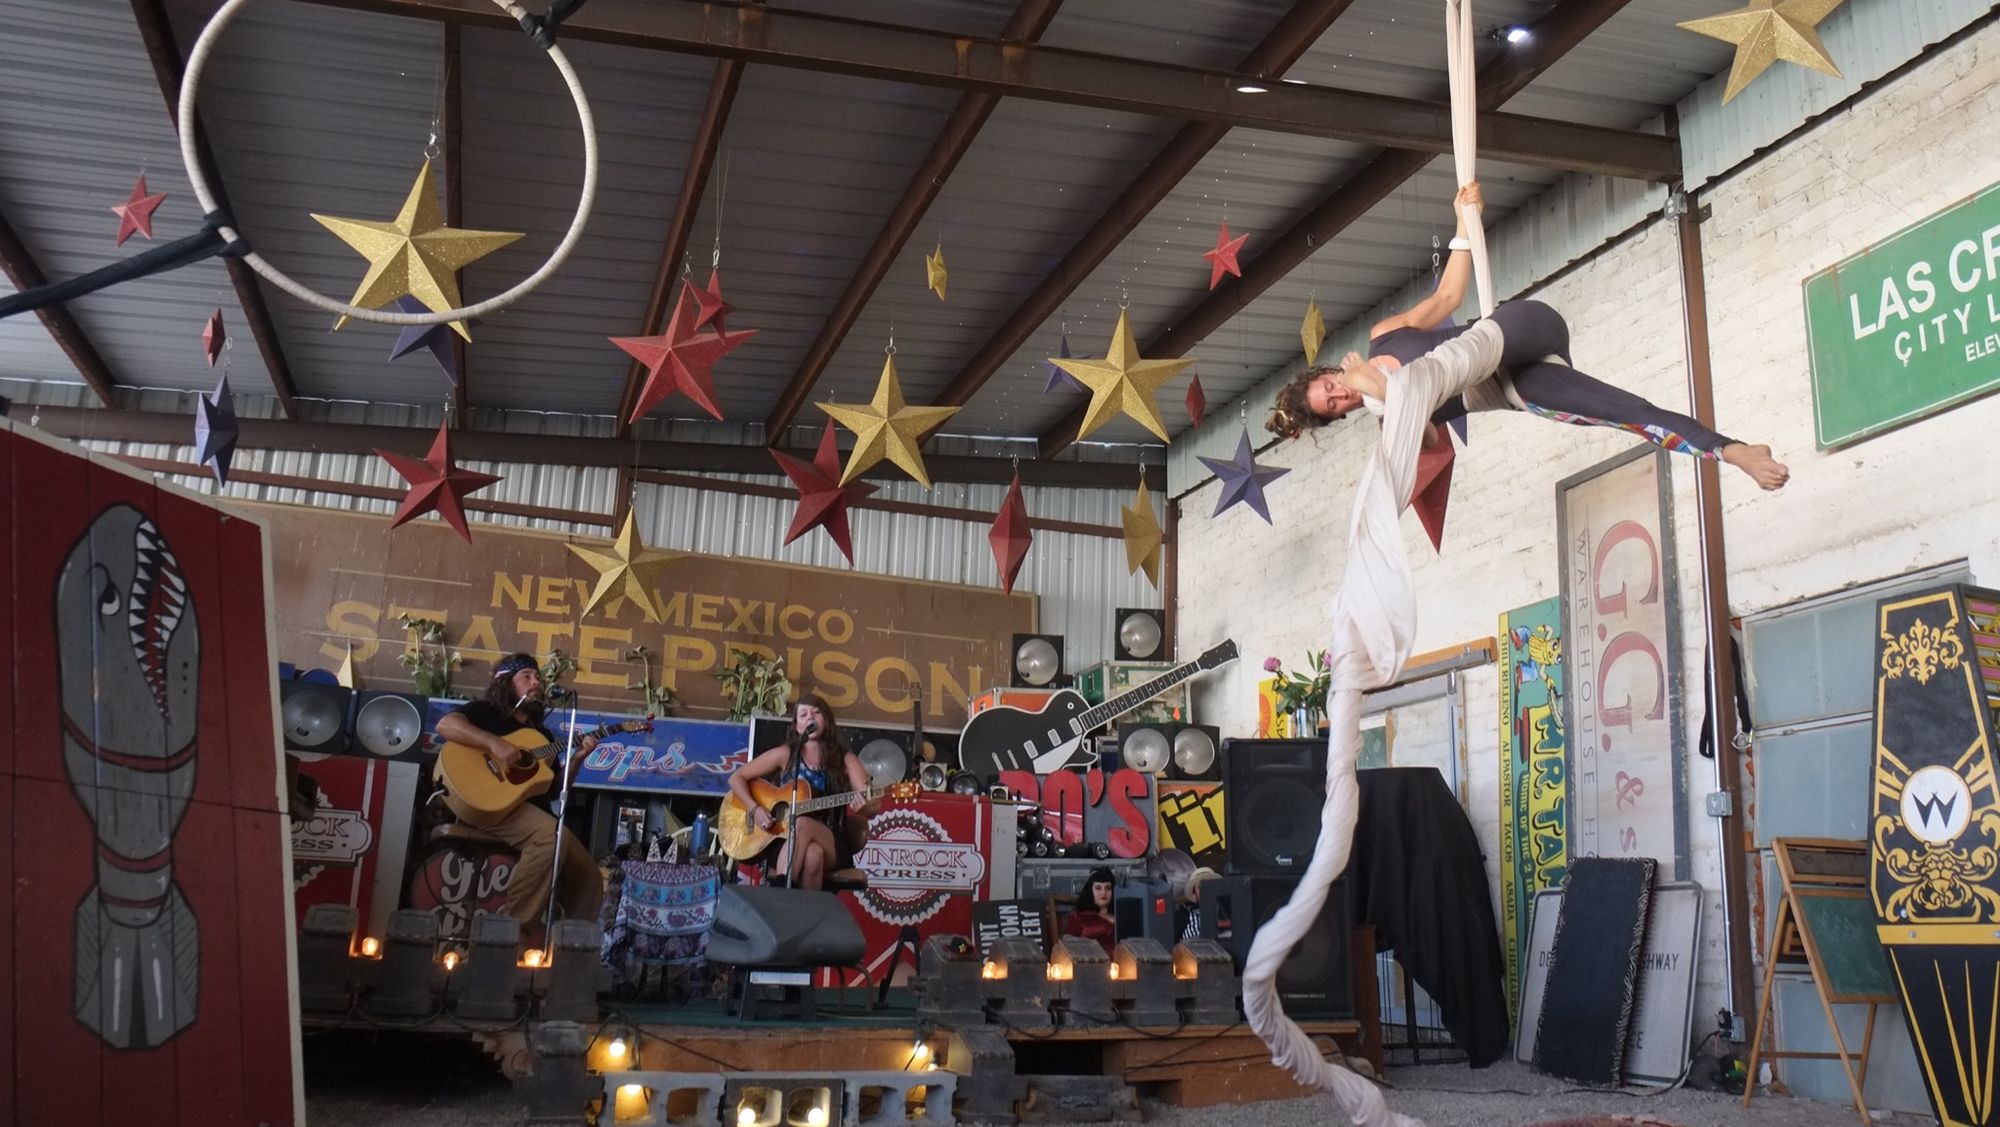 Woman performing aerial silks with live music in a circus like setting